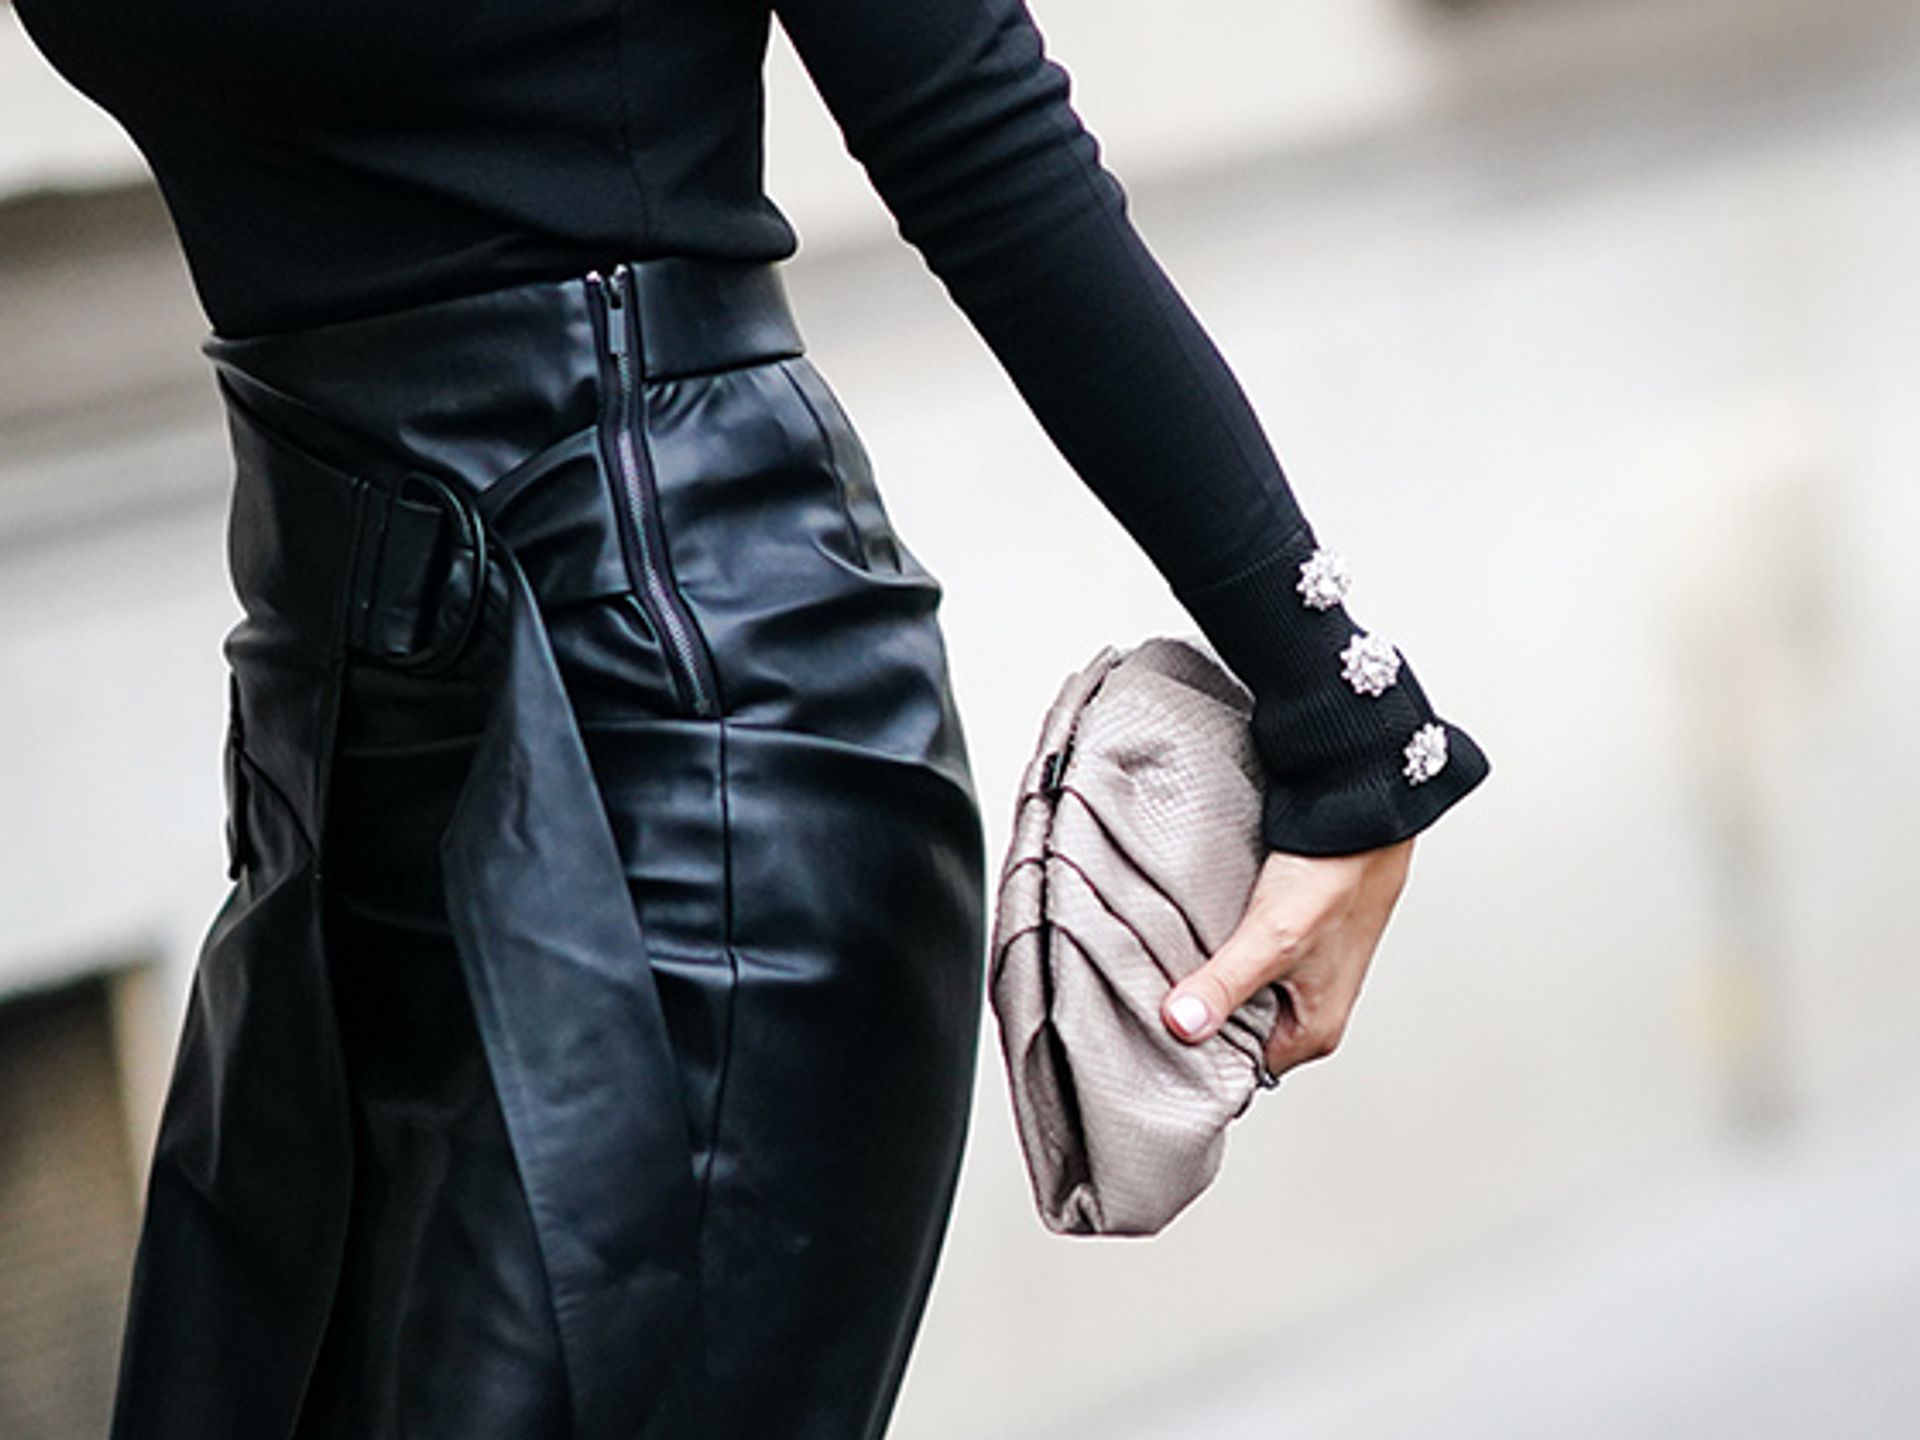 How to style a leather skirt this season